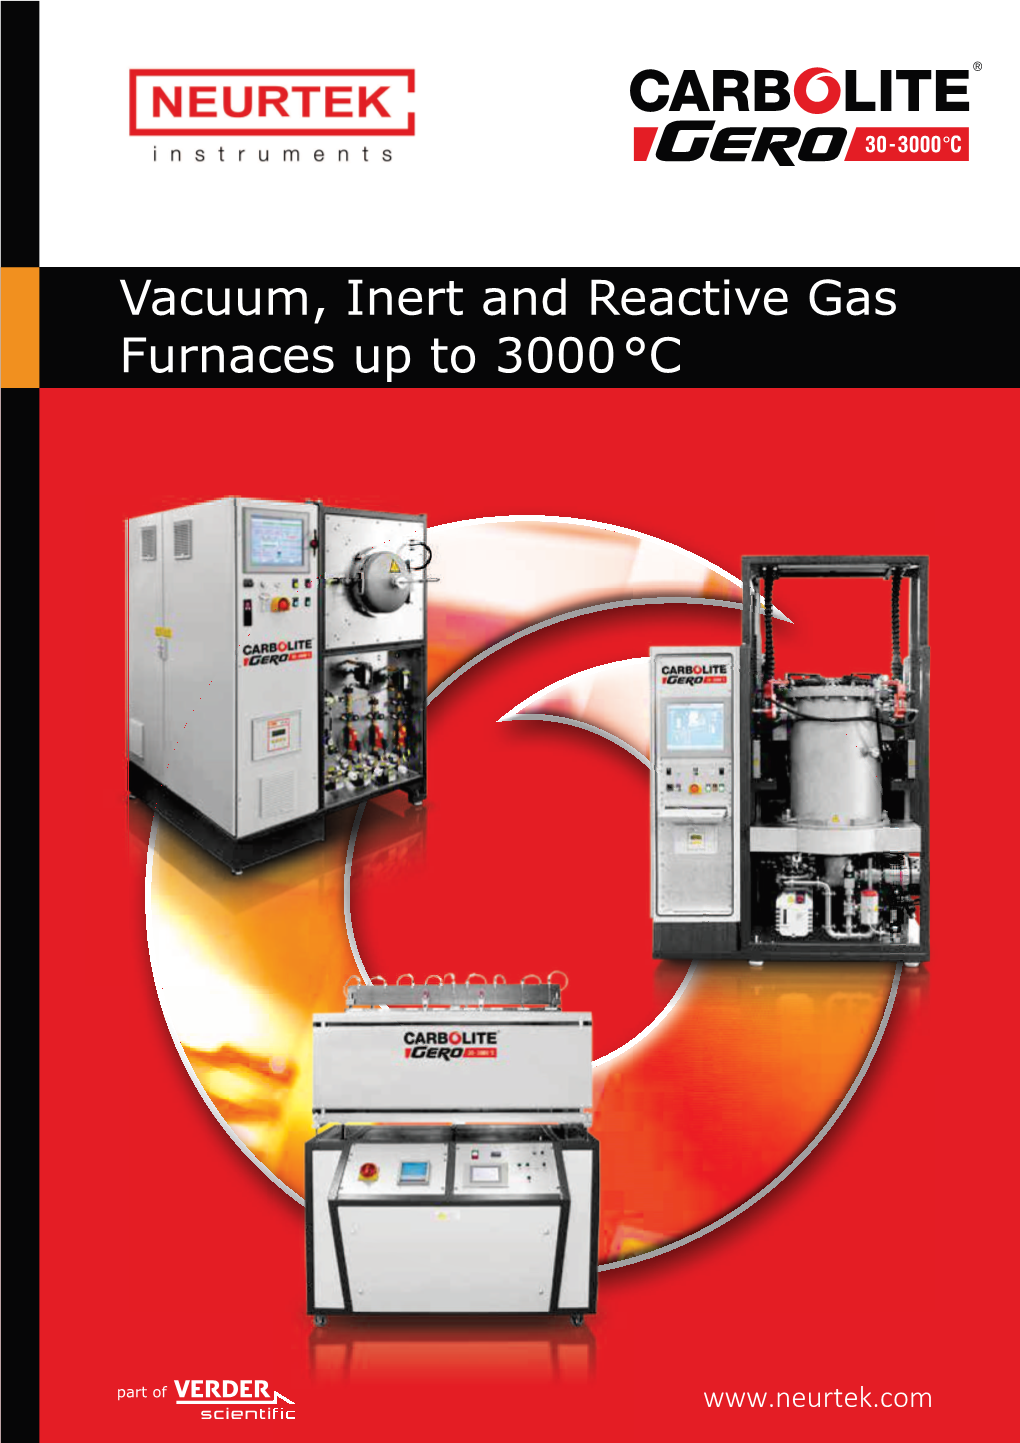 Vacuum, Inert and Reactive Gas Furnaces up to 3000 °C